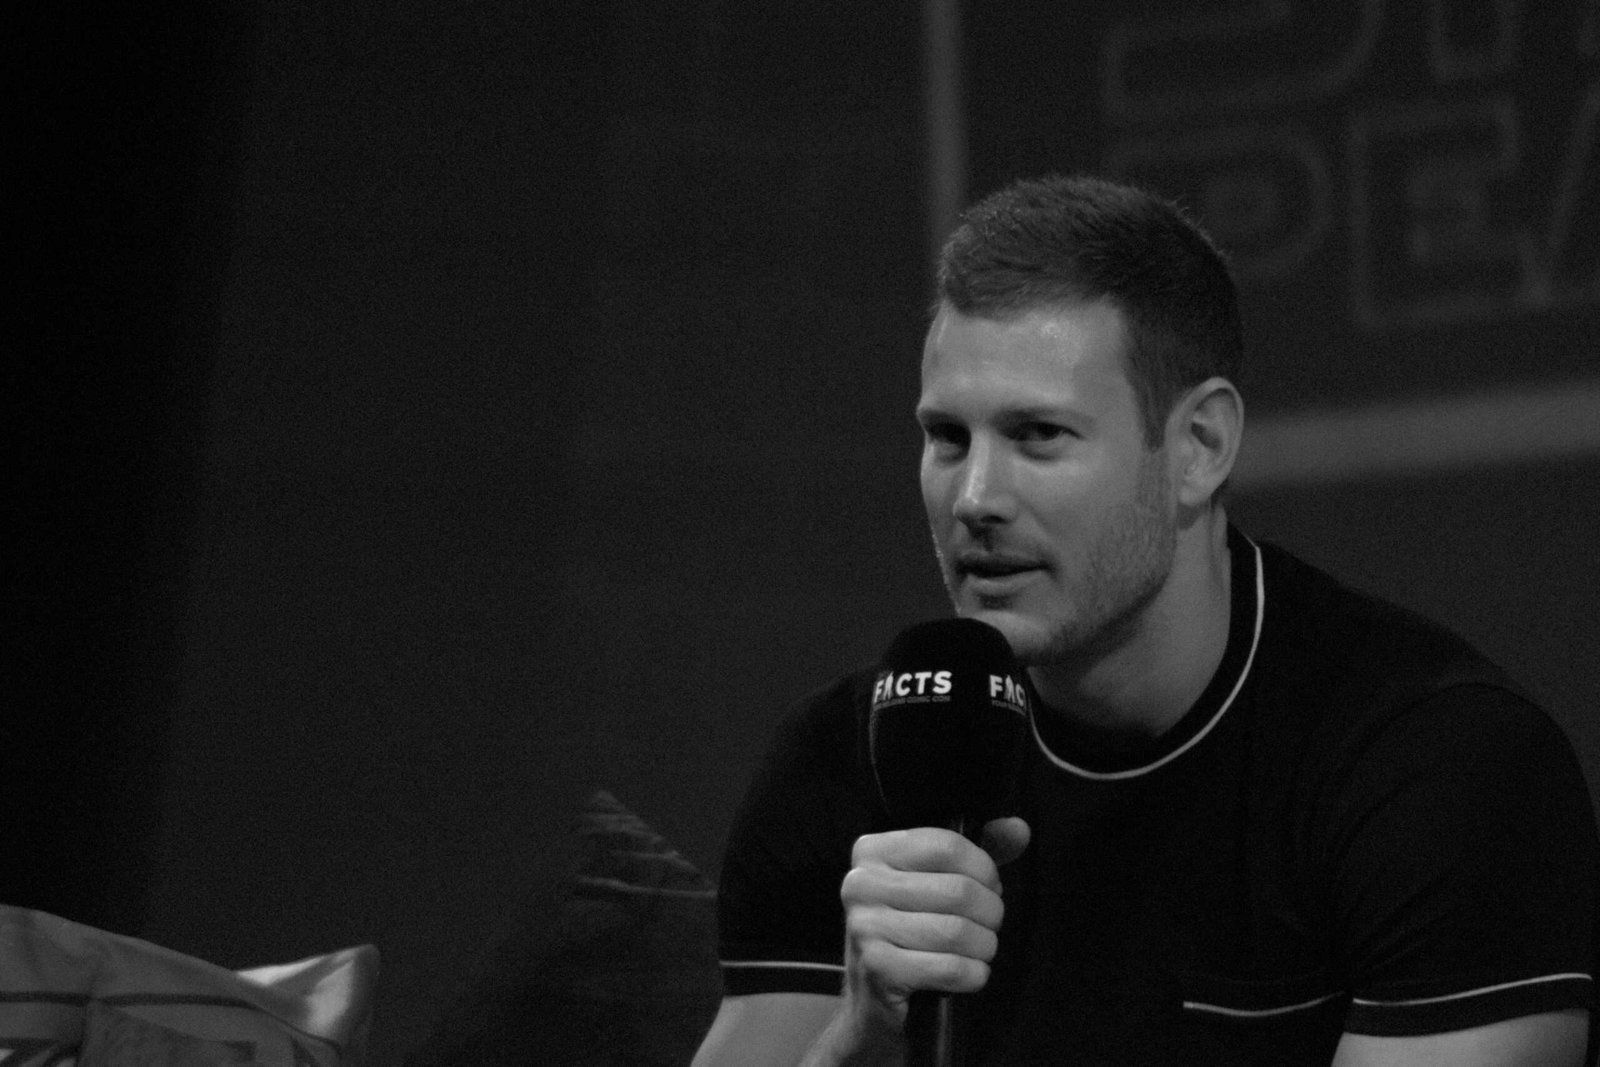 Tom Hopper is a British actor. He has appeared as Percival in Merlin, Billy Bones in Black Sails, Dickon Tarly in Game of Thrones, and Luther Hargreeves in The Umbrella Academy. Ghost photographed him at the Facts Convention Ghent (Spring edition) in 2019.